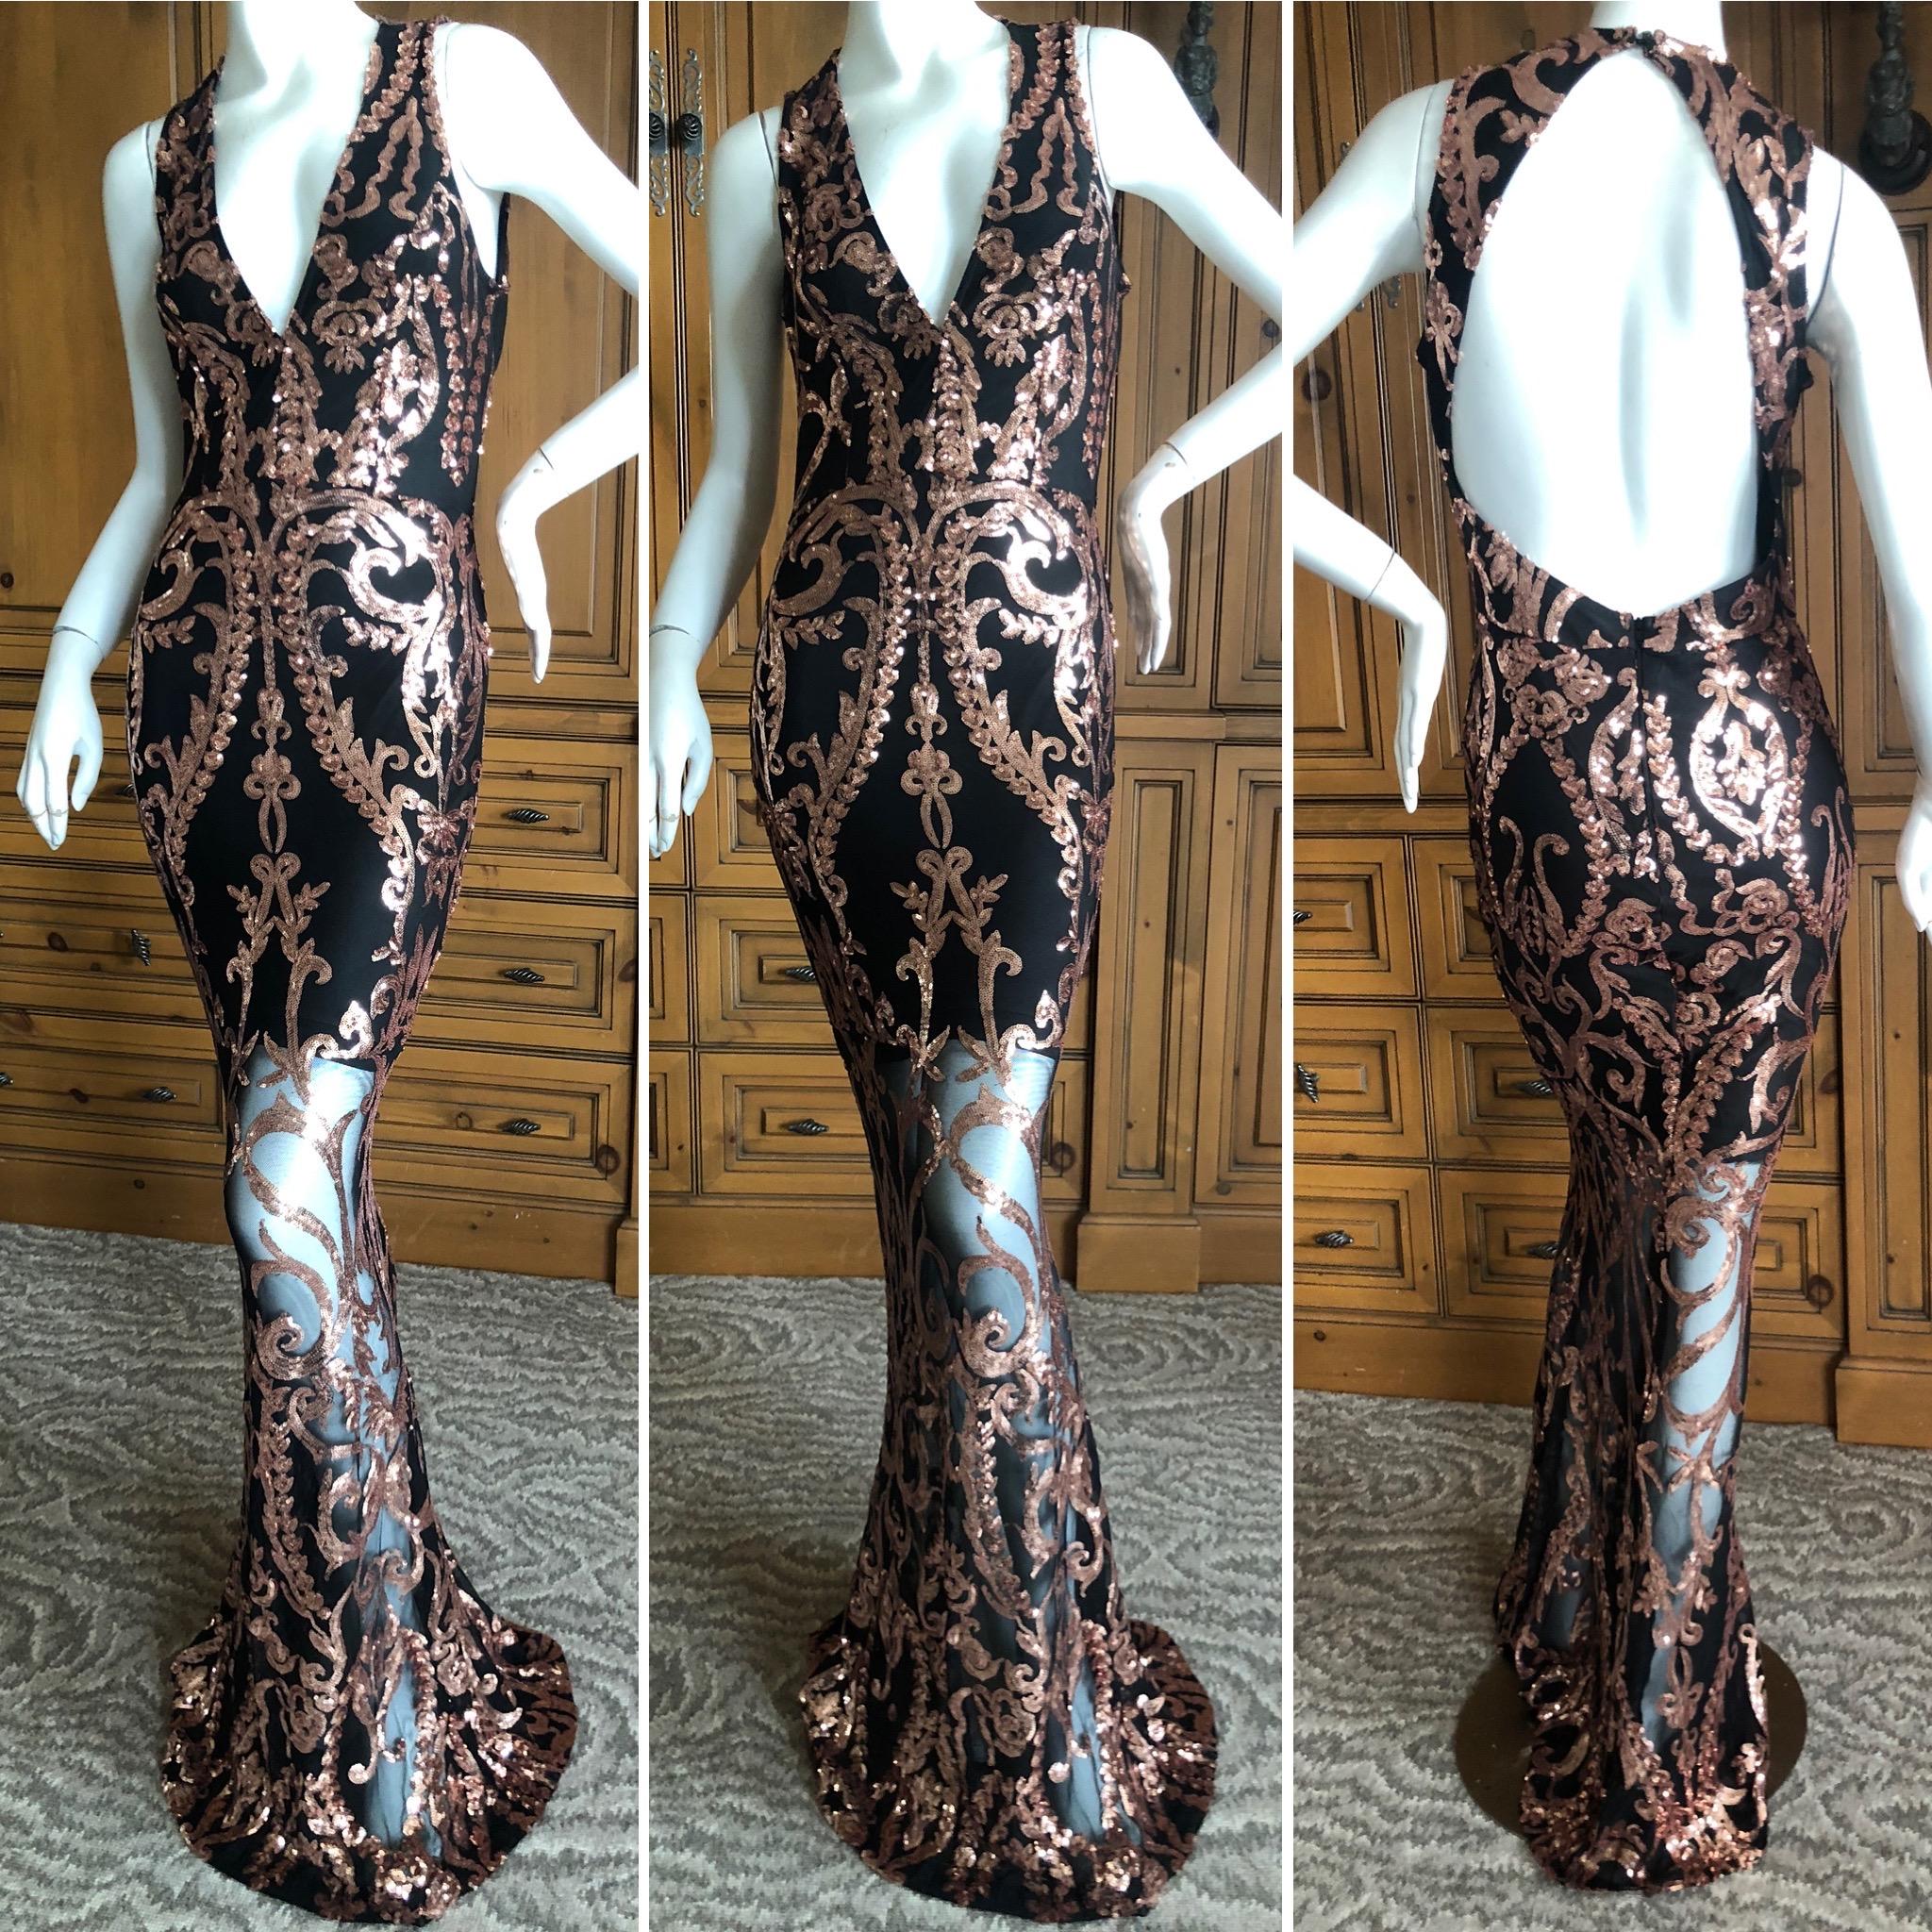 Versace Collection Sheer Net Evening Dress with Baroque Gold Sequin Details.
The lining goes to the knees, but it would be wonderful to remove it completely.
Size 42
Bust 38